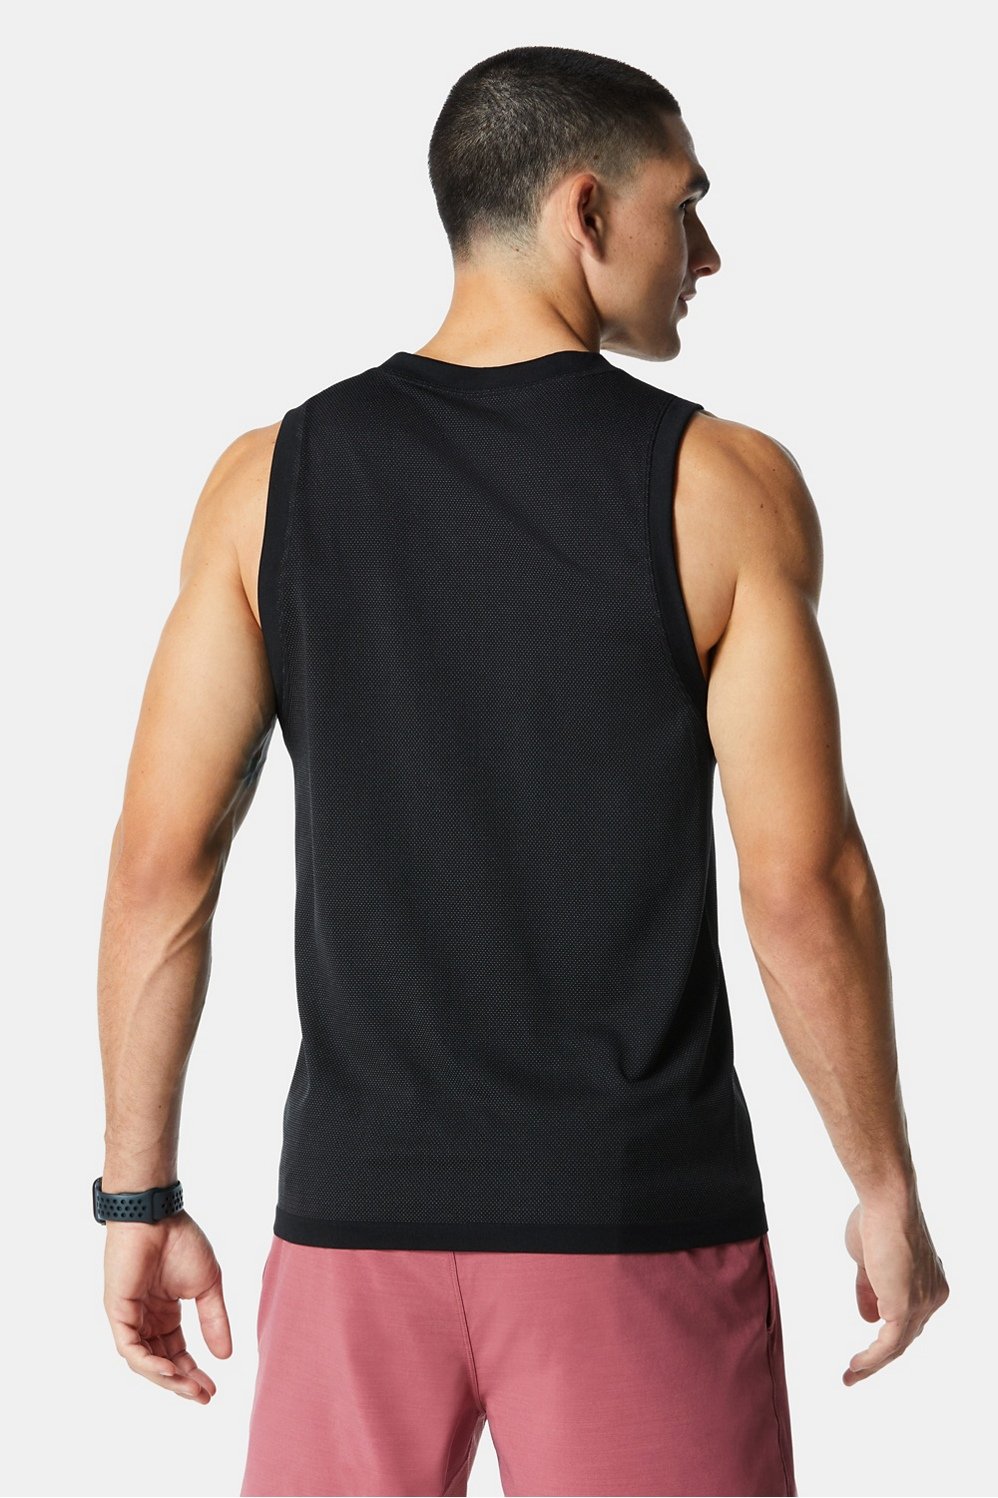 TOUGH MUDDER by Fabletics The Training Day Tank - Men's – Tough Mudder Shop